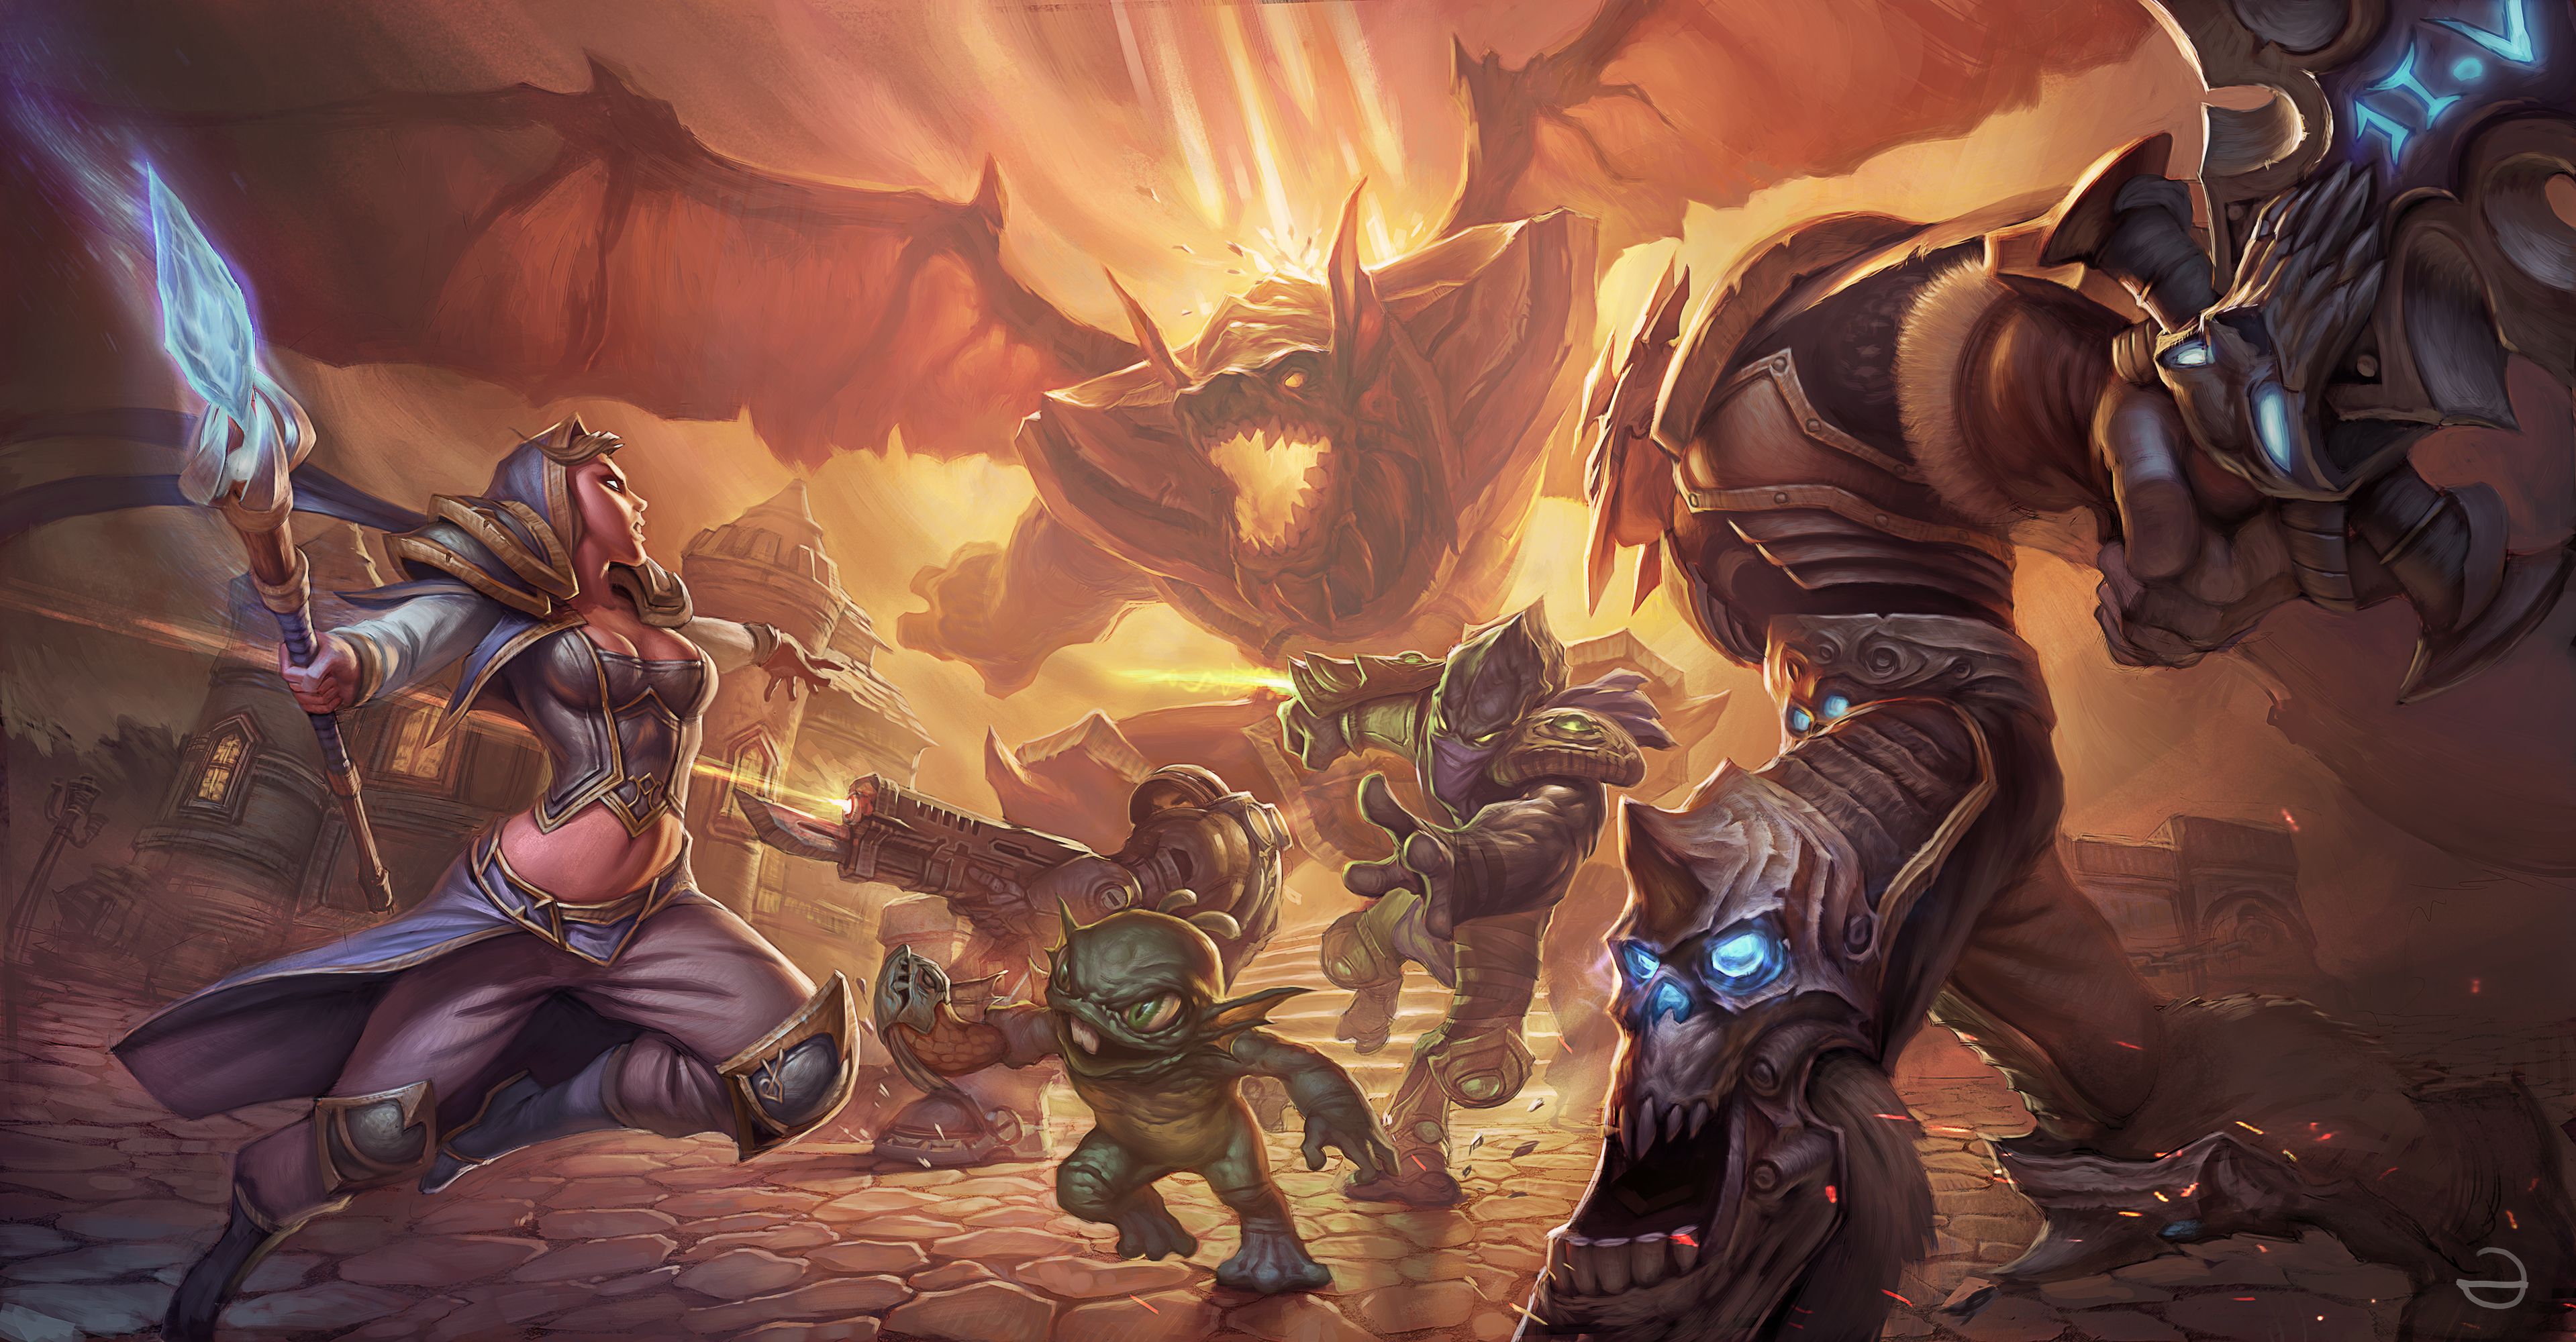 3838x2000 Heroes Of The Storm Hd Wallpaper Hd Heroes Of The Storm